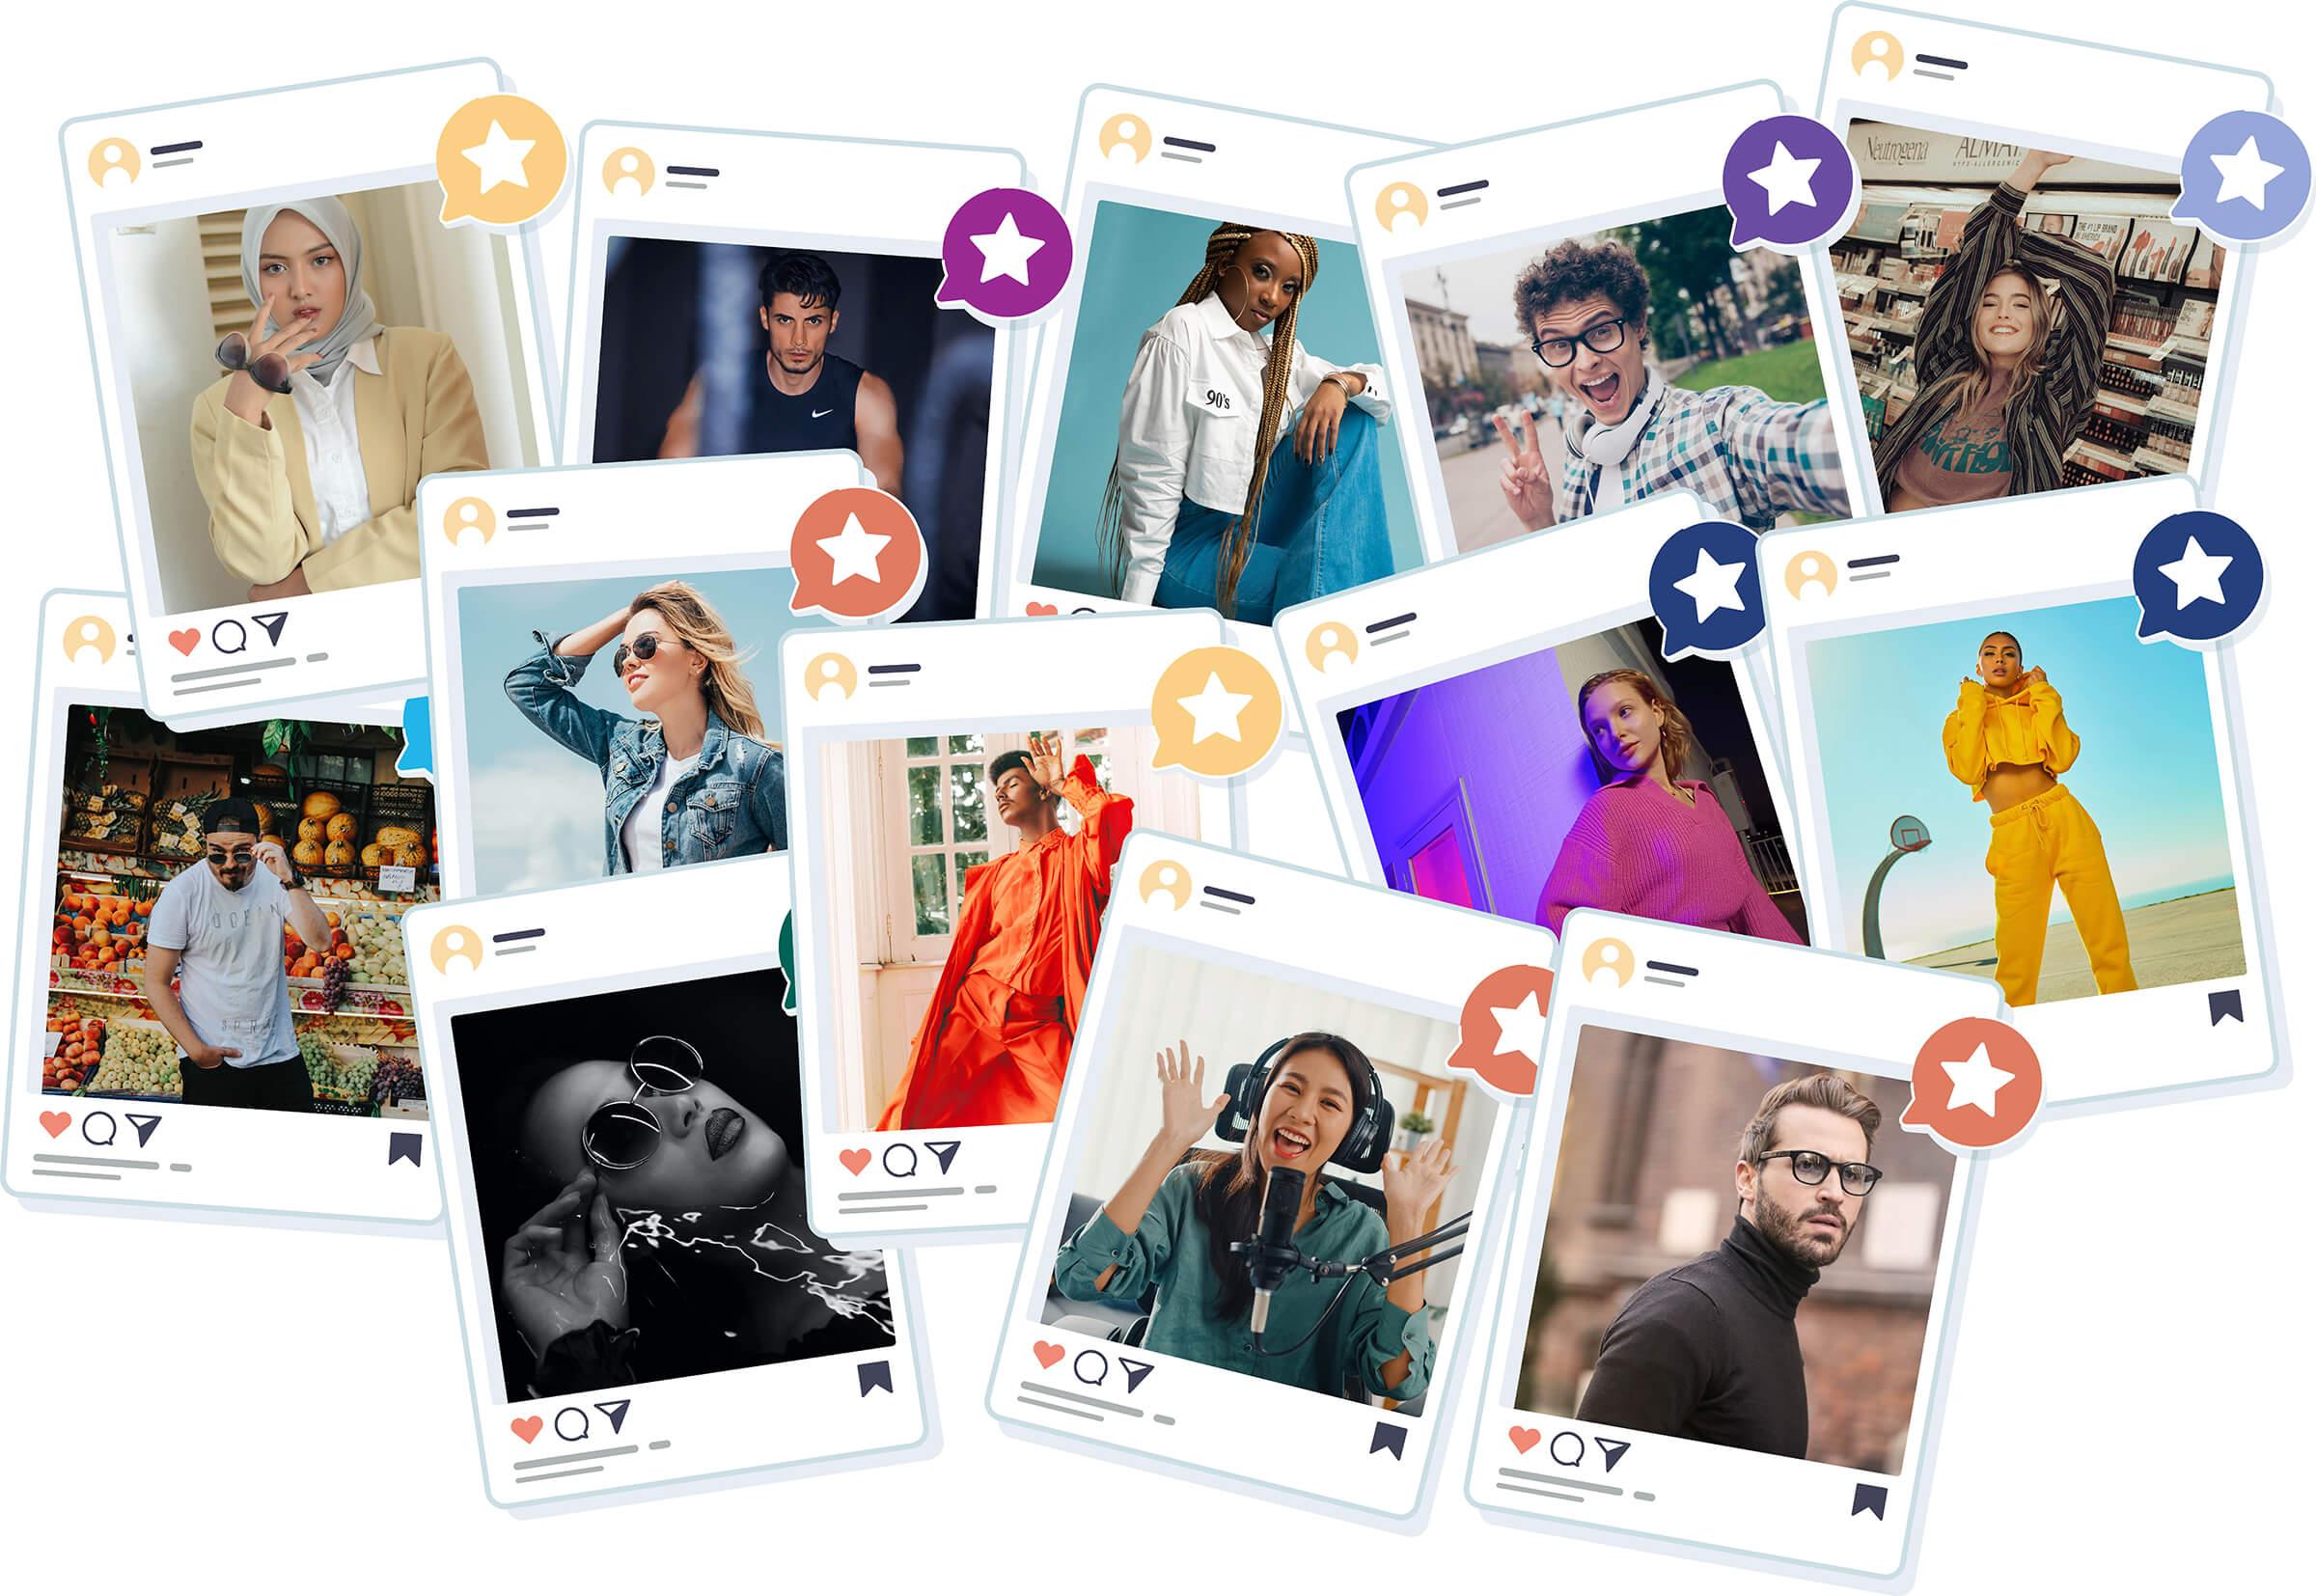 All about Instagram influencers